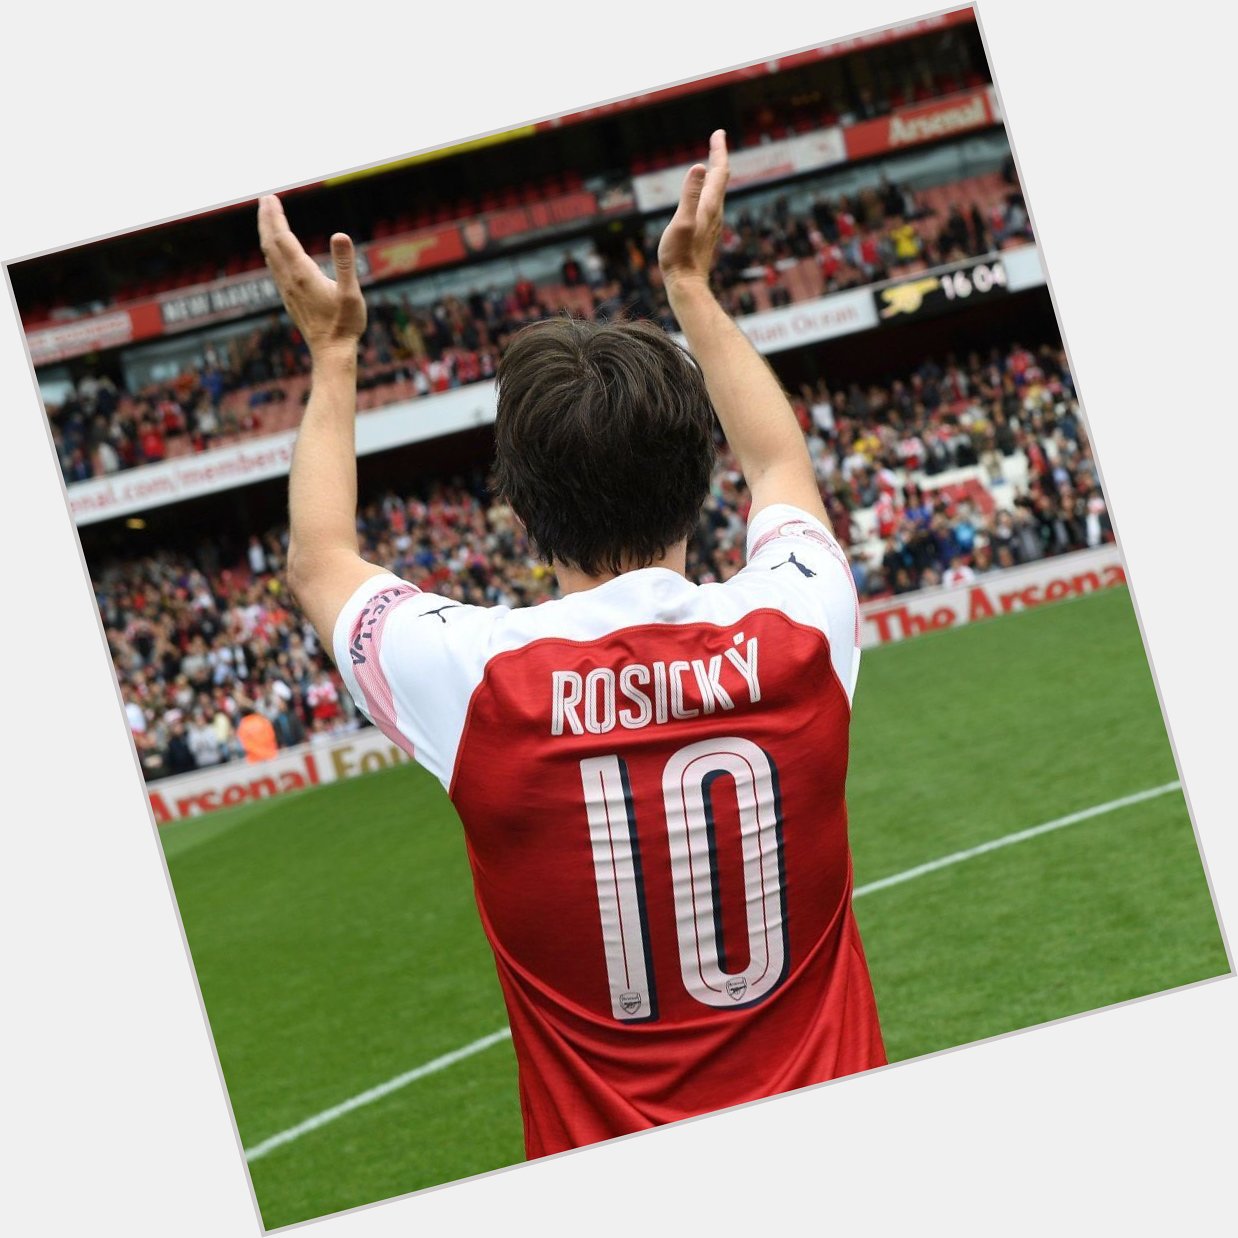  If you love football, you love Tomá Rosicky - Arsène Wenger. 

Happy 41st birthday to a true Gunner. 